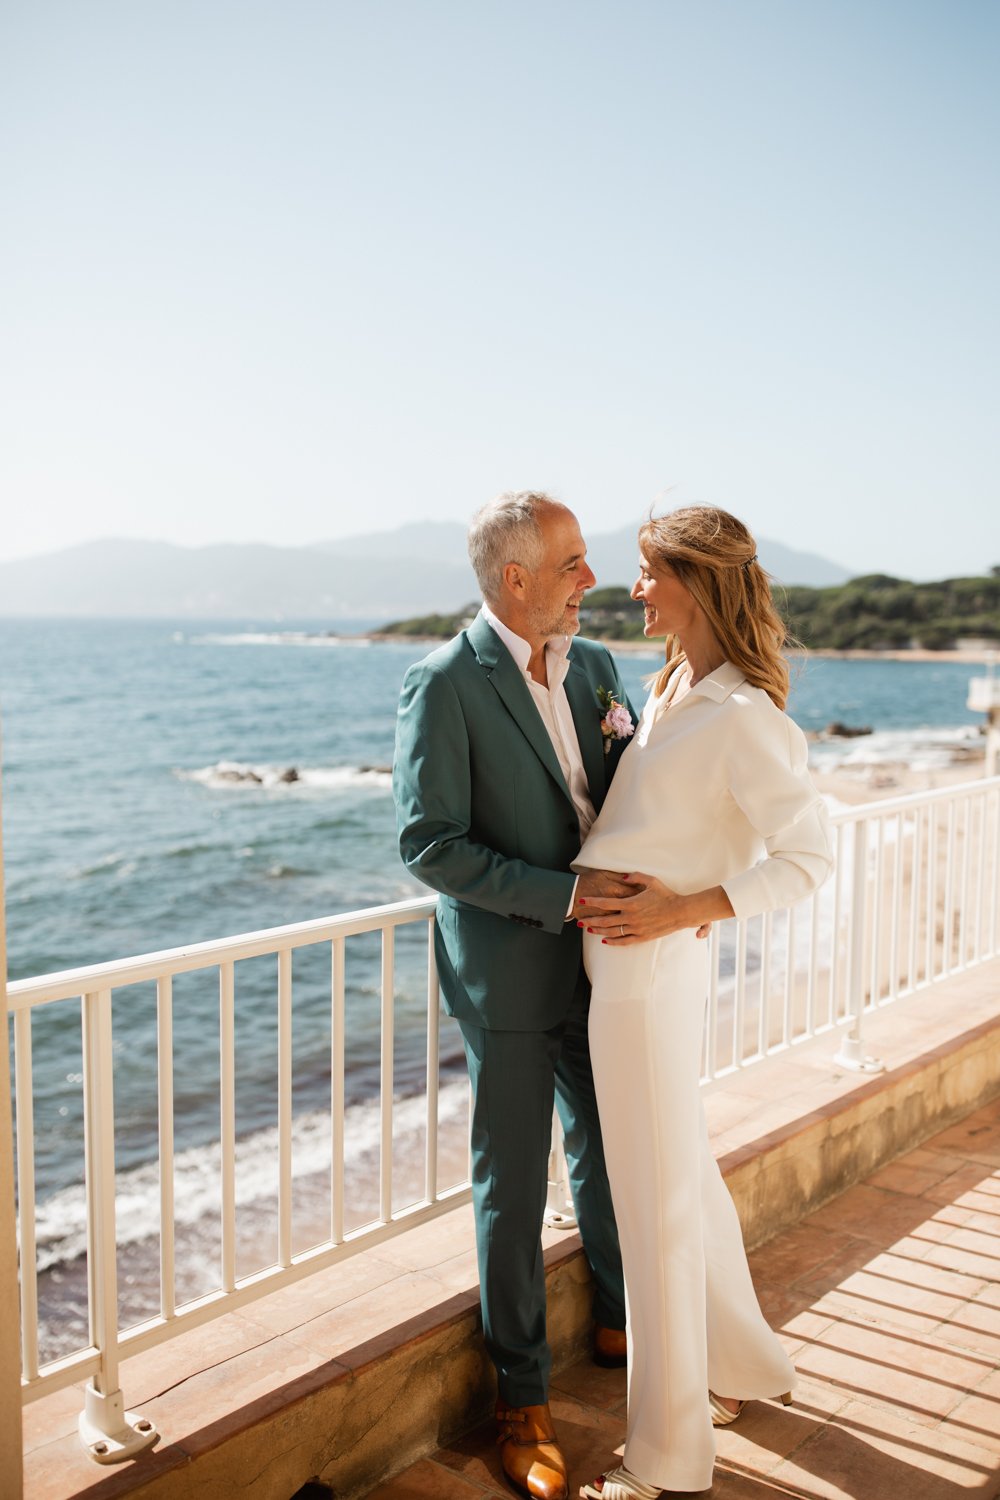 wedding marriage mariage photographe corse corsica ajaccio Krista Espino Anza Creative family photography mairee maire courthouse france french le maquis hotel-37.jpg